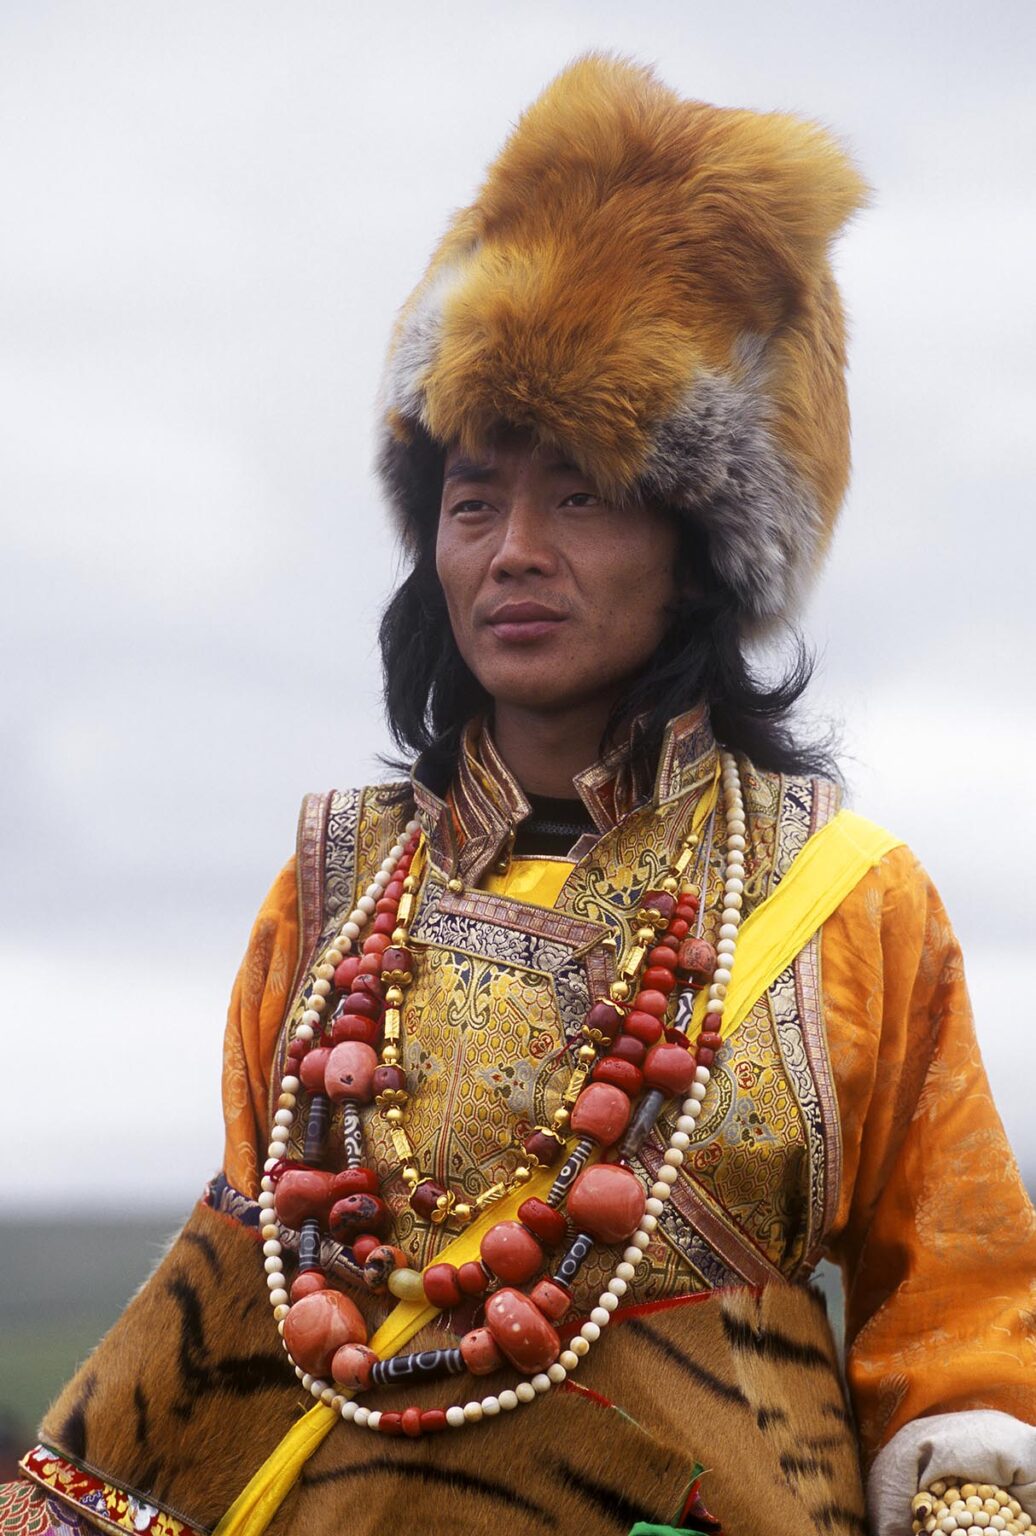 Male Khampa wears coral, zee stones, fox fur hat and tiger skin at the Litang Horse Festival - Sichuan Province, China, (Tibet)